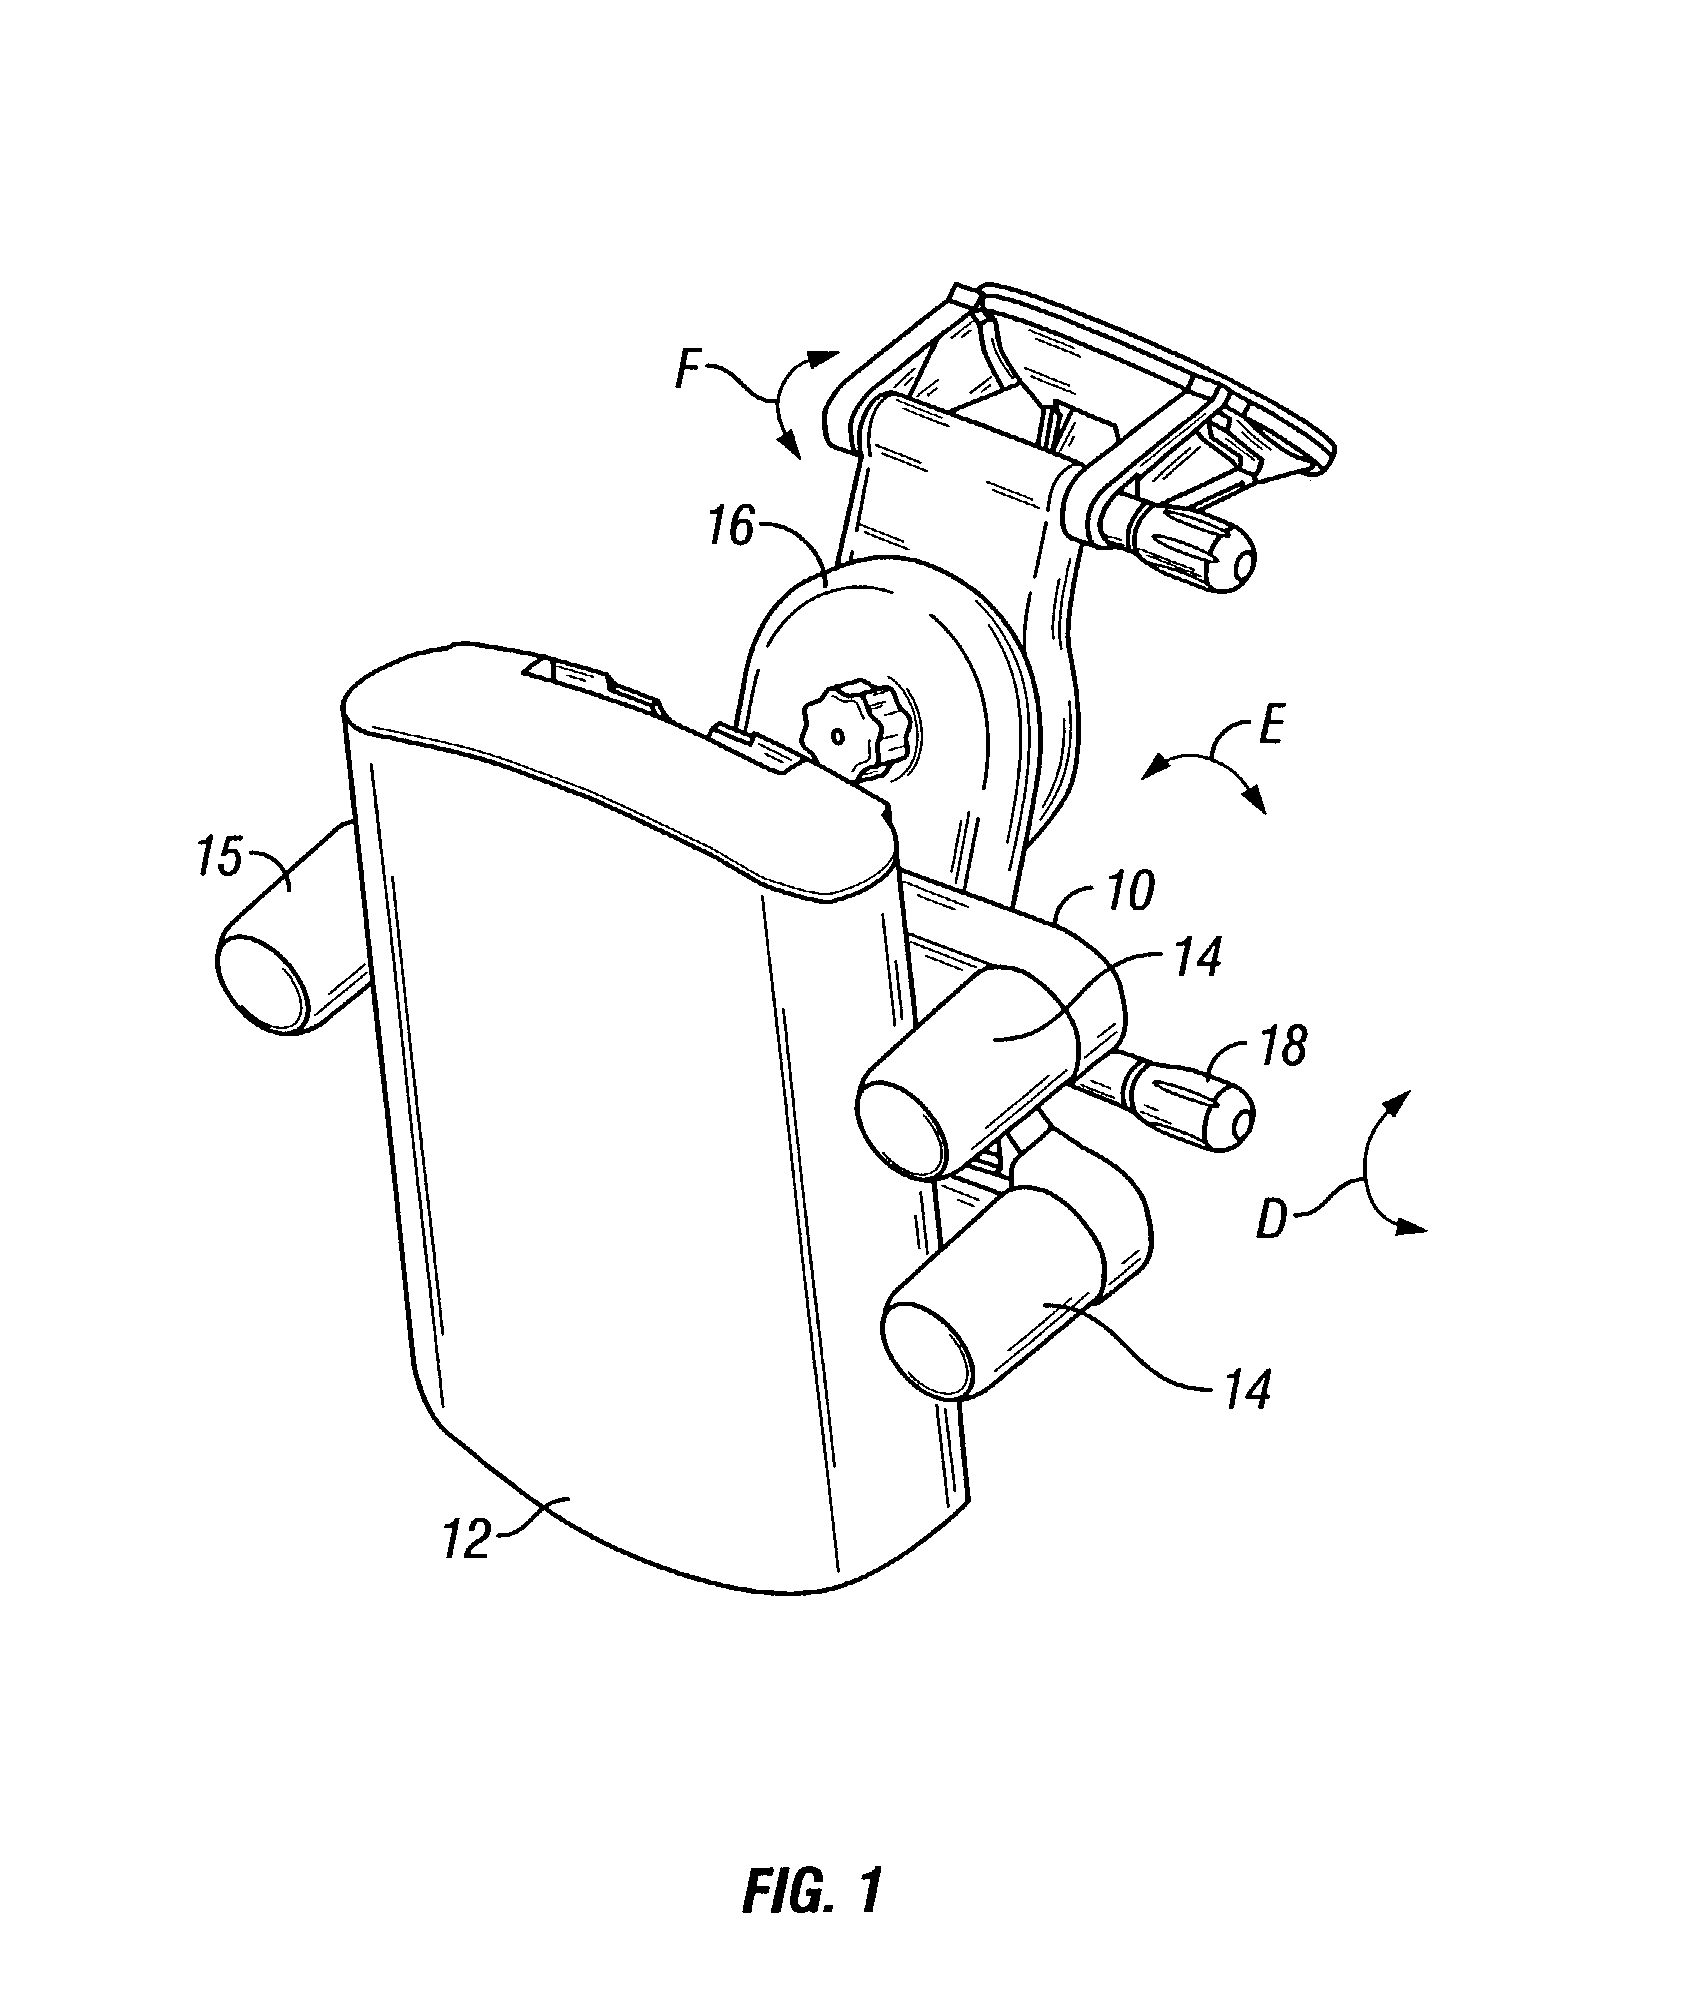 Mounting apparatus for an electronic device